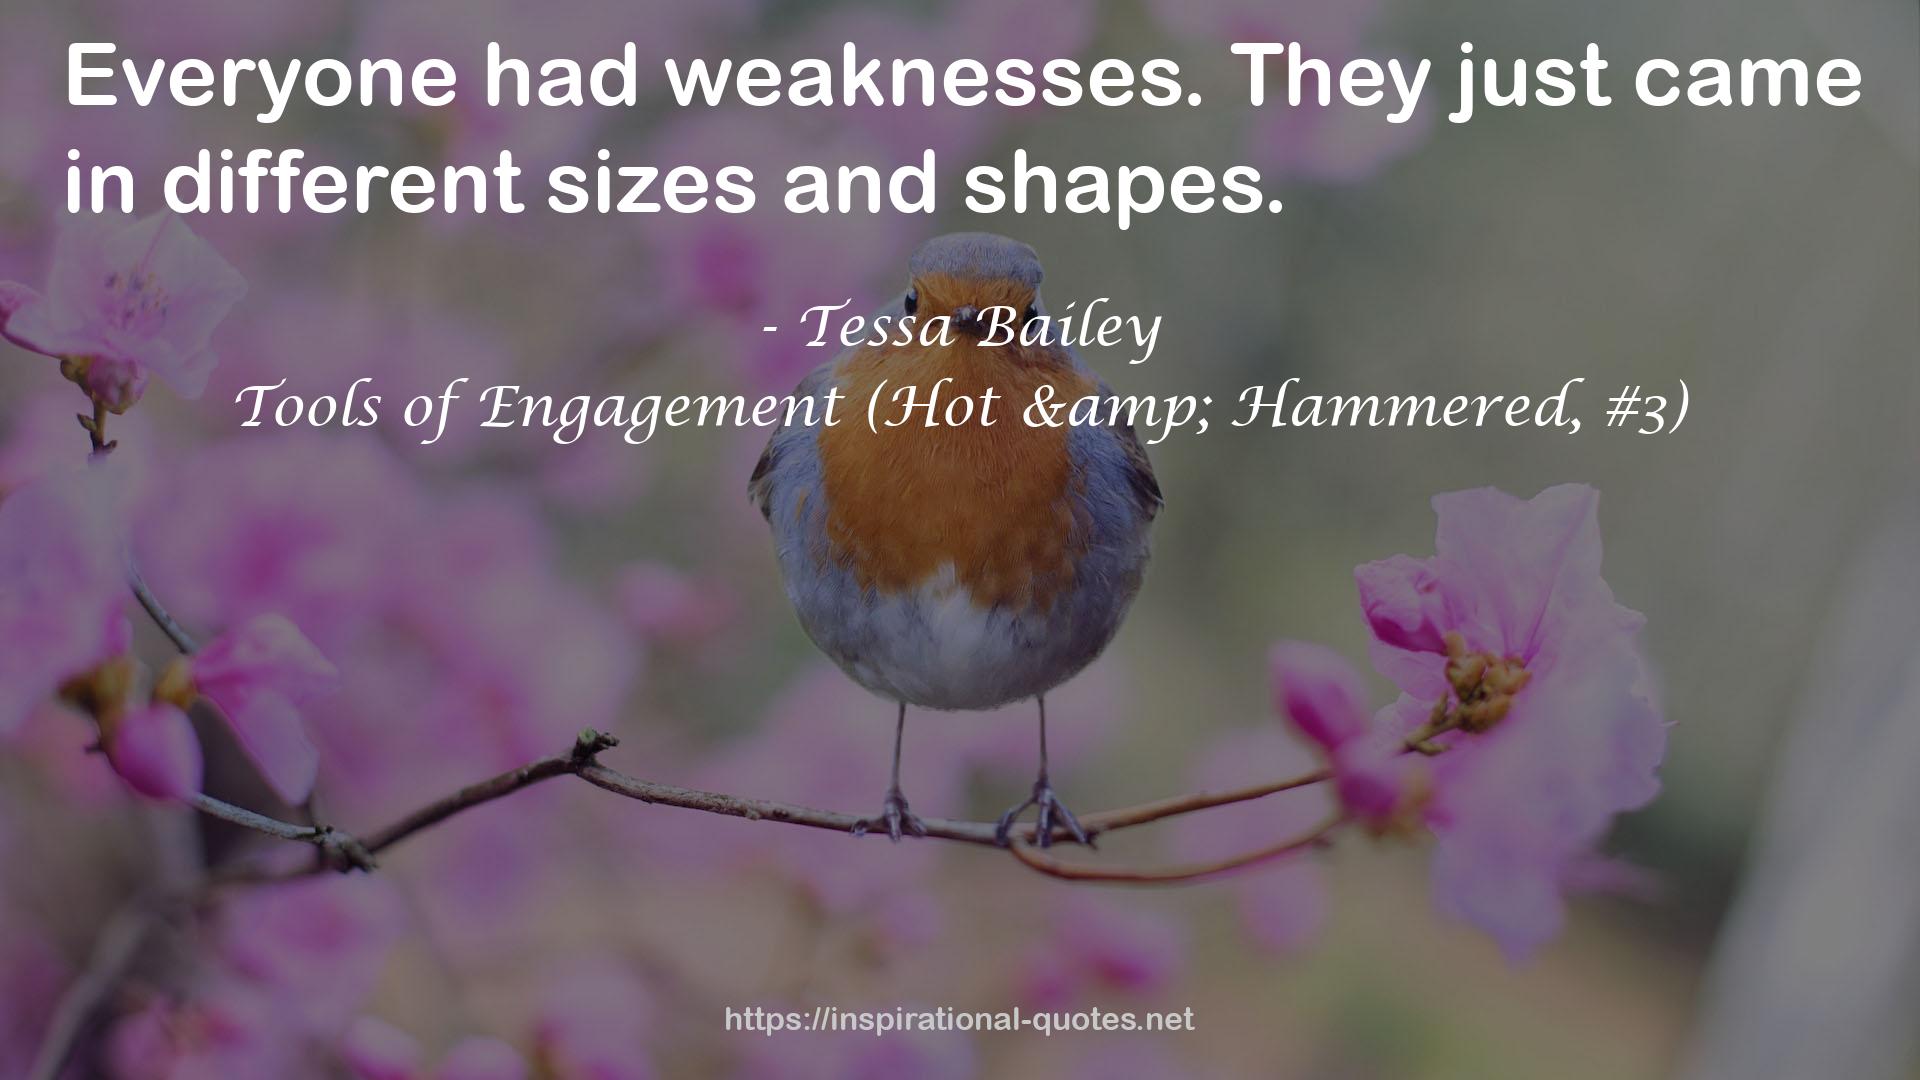 Tools of Engagement (Hot & Hammered, #3) QUOTES